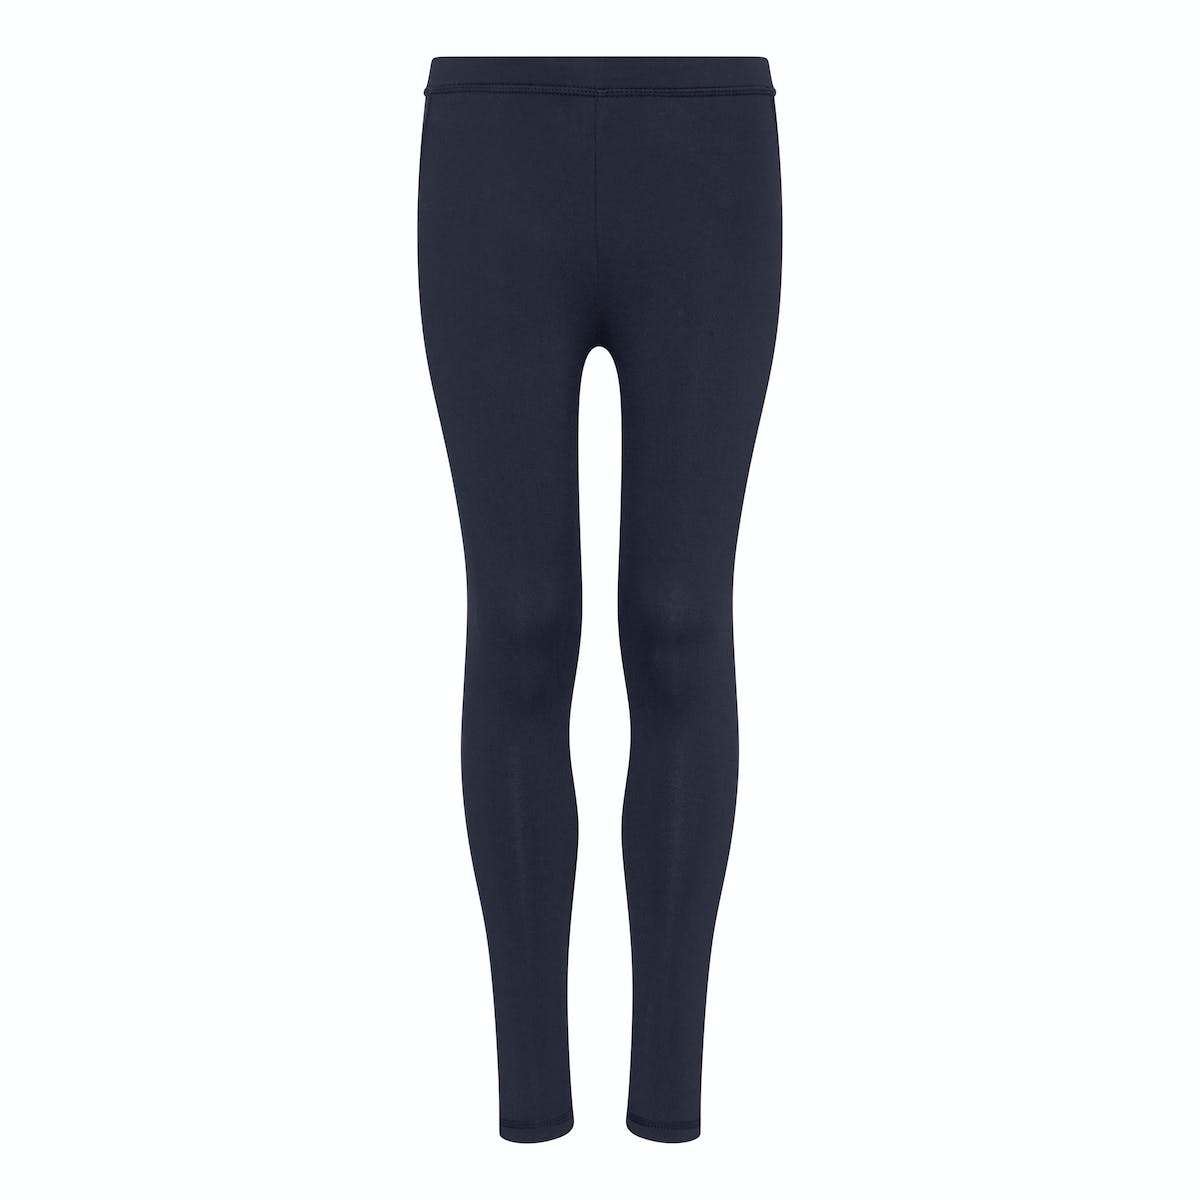 Girls Cool Athletic Pants JC087J - French navy.